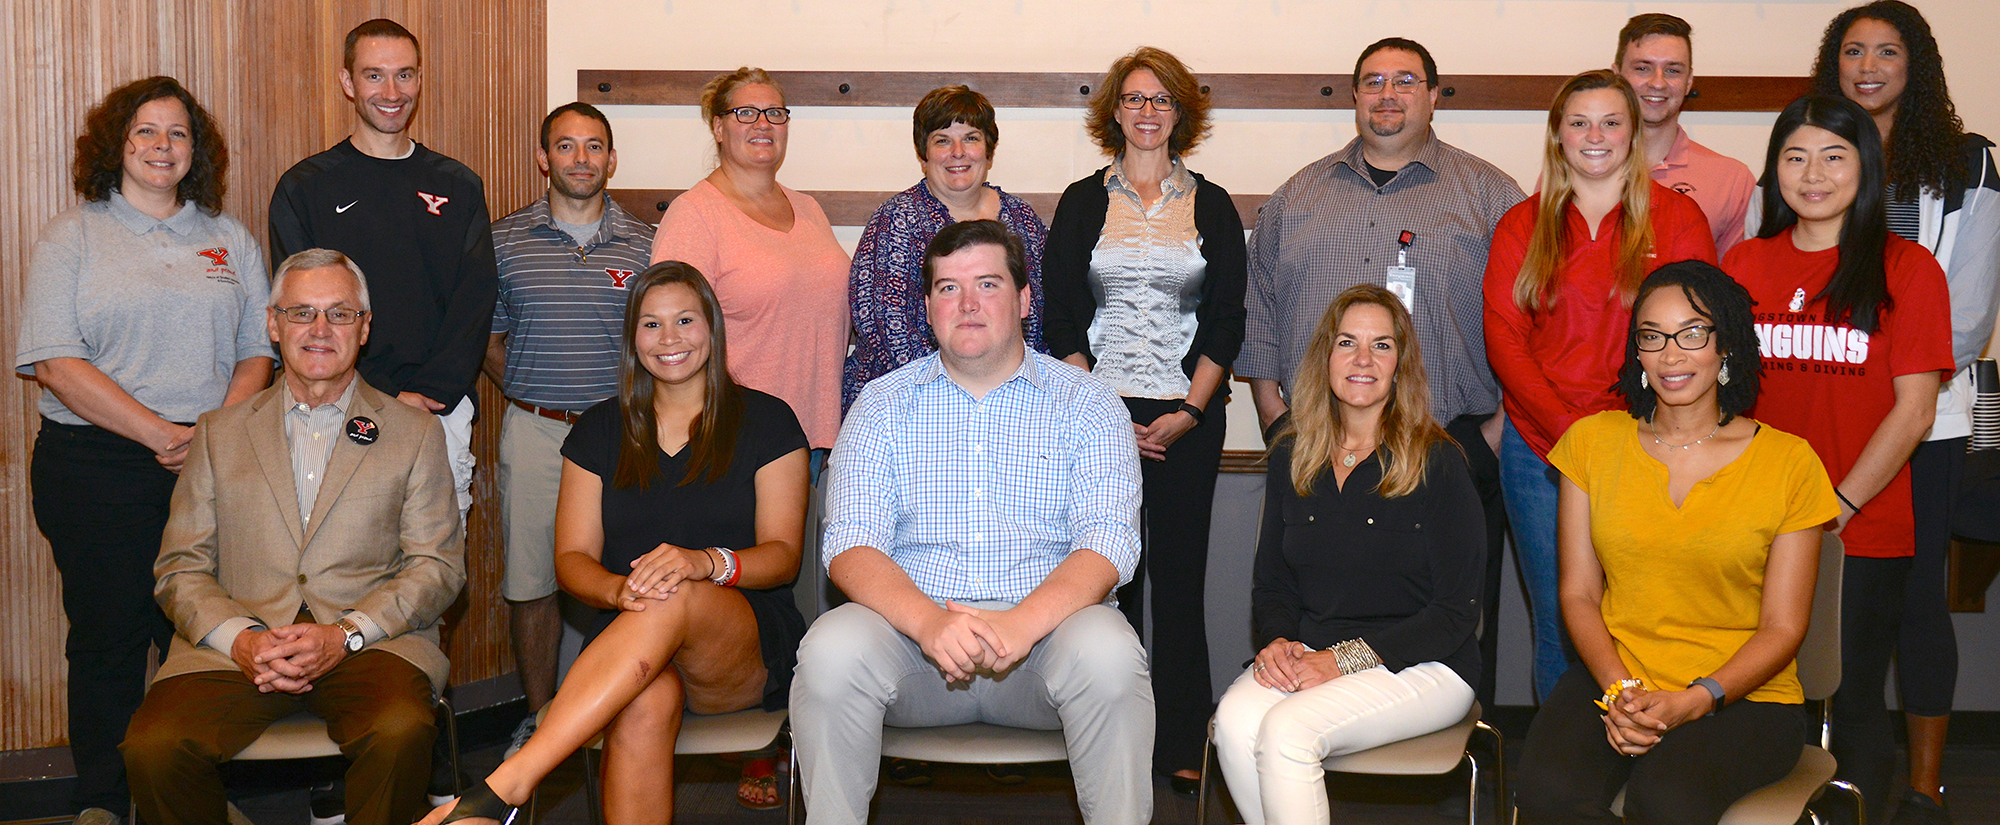 As the 2019-20 academic year opens, YSU welcomes 10 new faculty and 18 new staff members to campus: